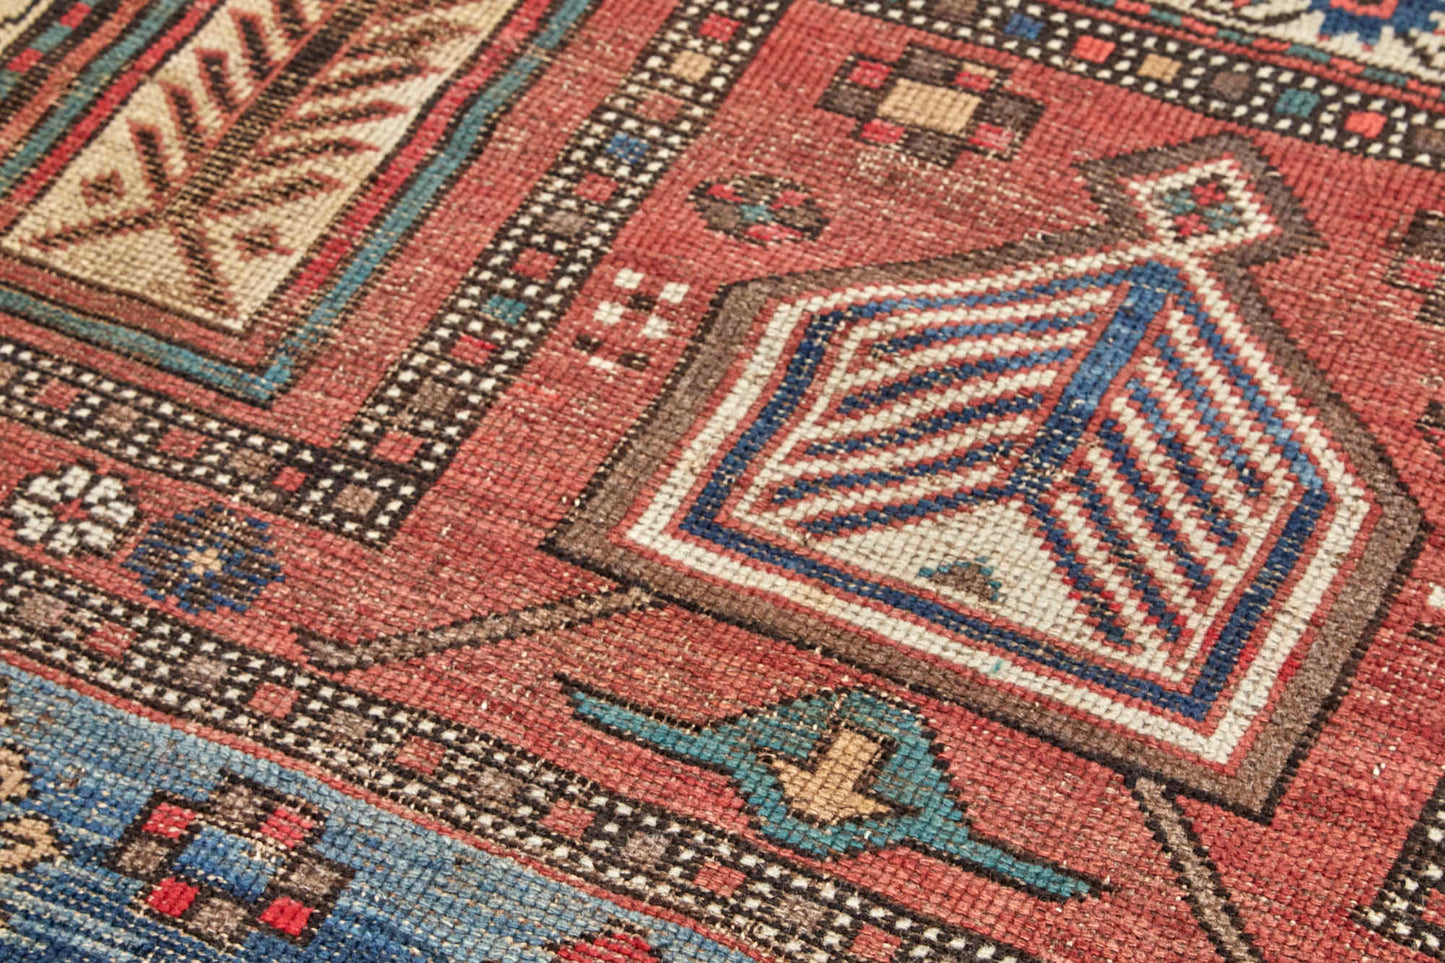 hand woven pink, blue and white antique Persian prayer rug - Available from King Kennedy Rugs Los Angeles